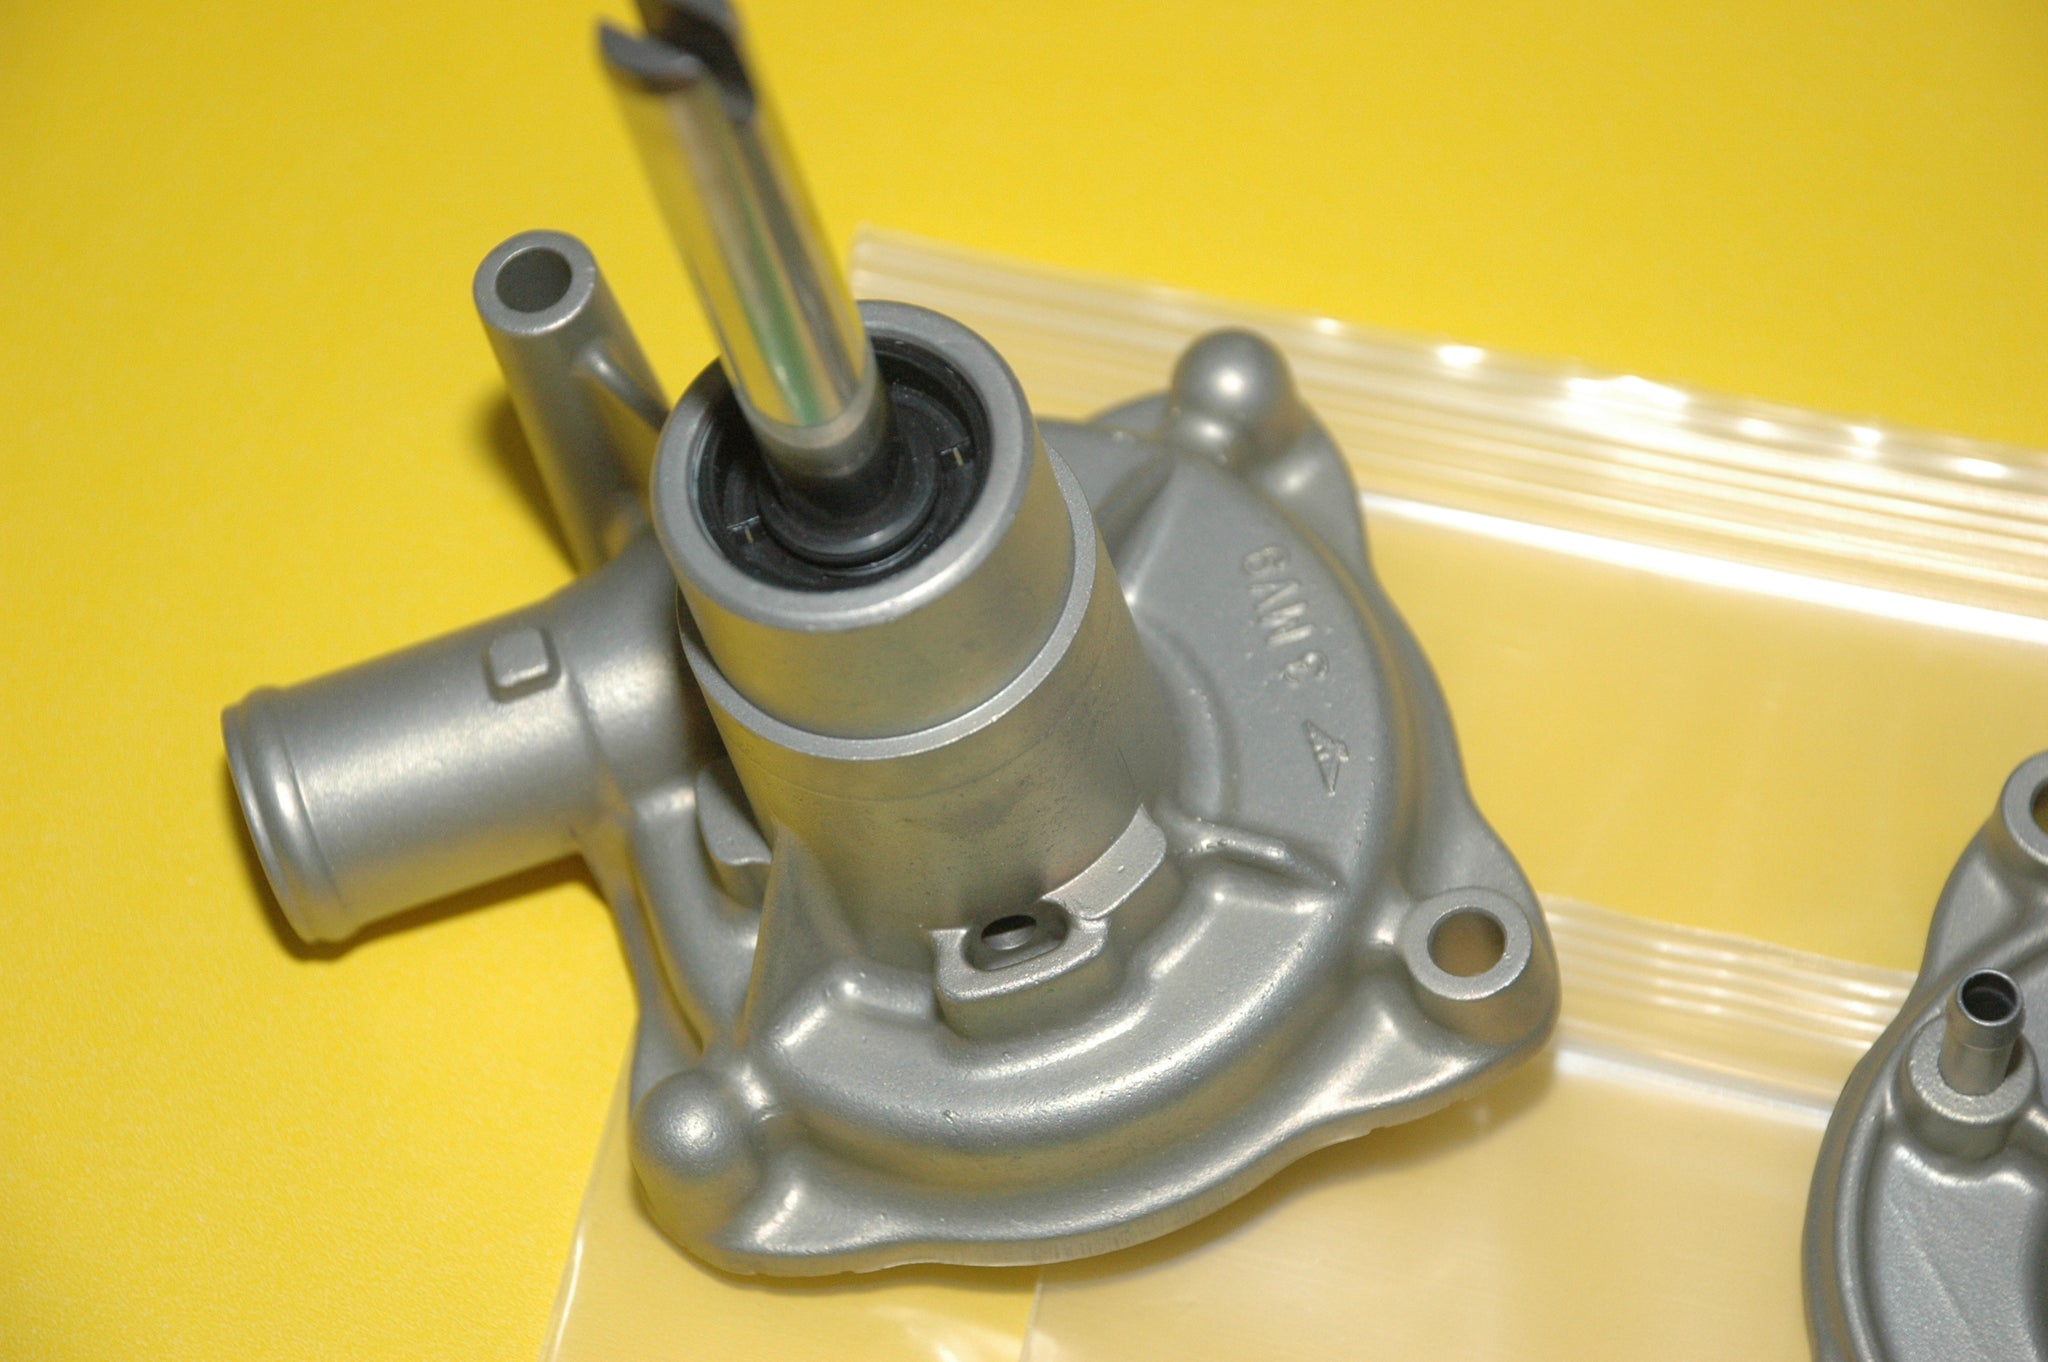 Honda 19200-MW0-010,  93-97 CBR900RR Hurricane Water Pump, With Front Cover P/N 19220-MW0-010, Overhauled